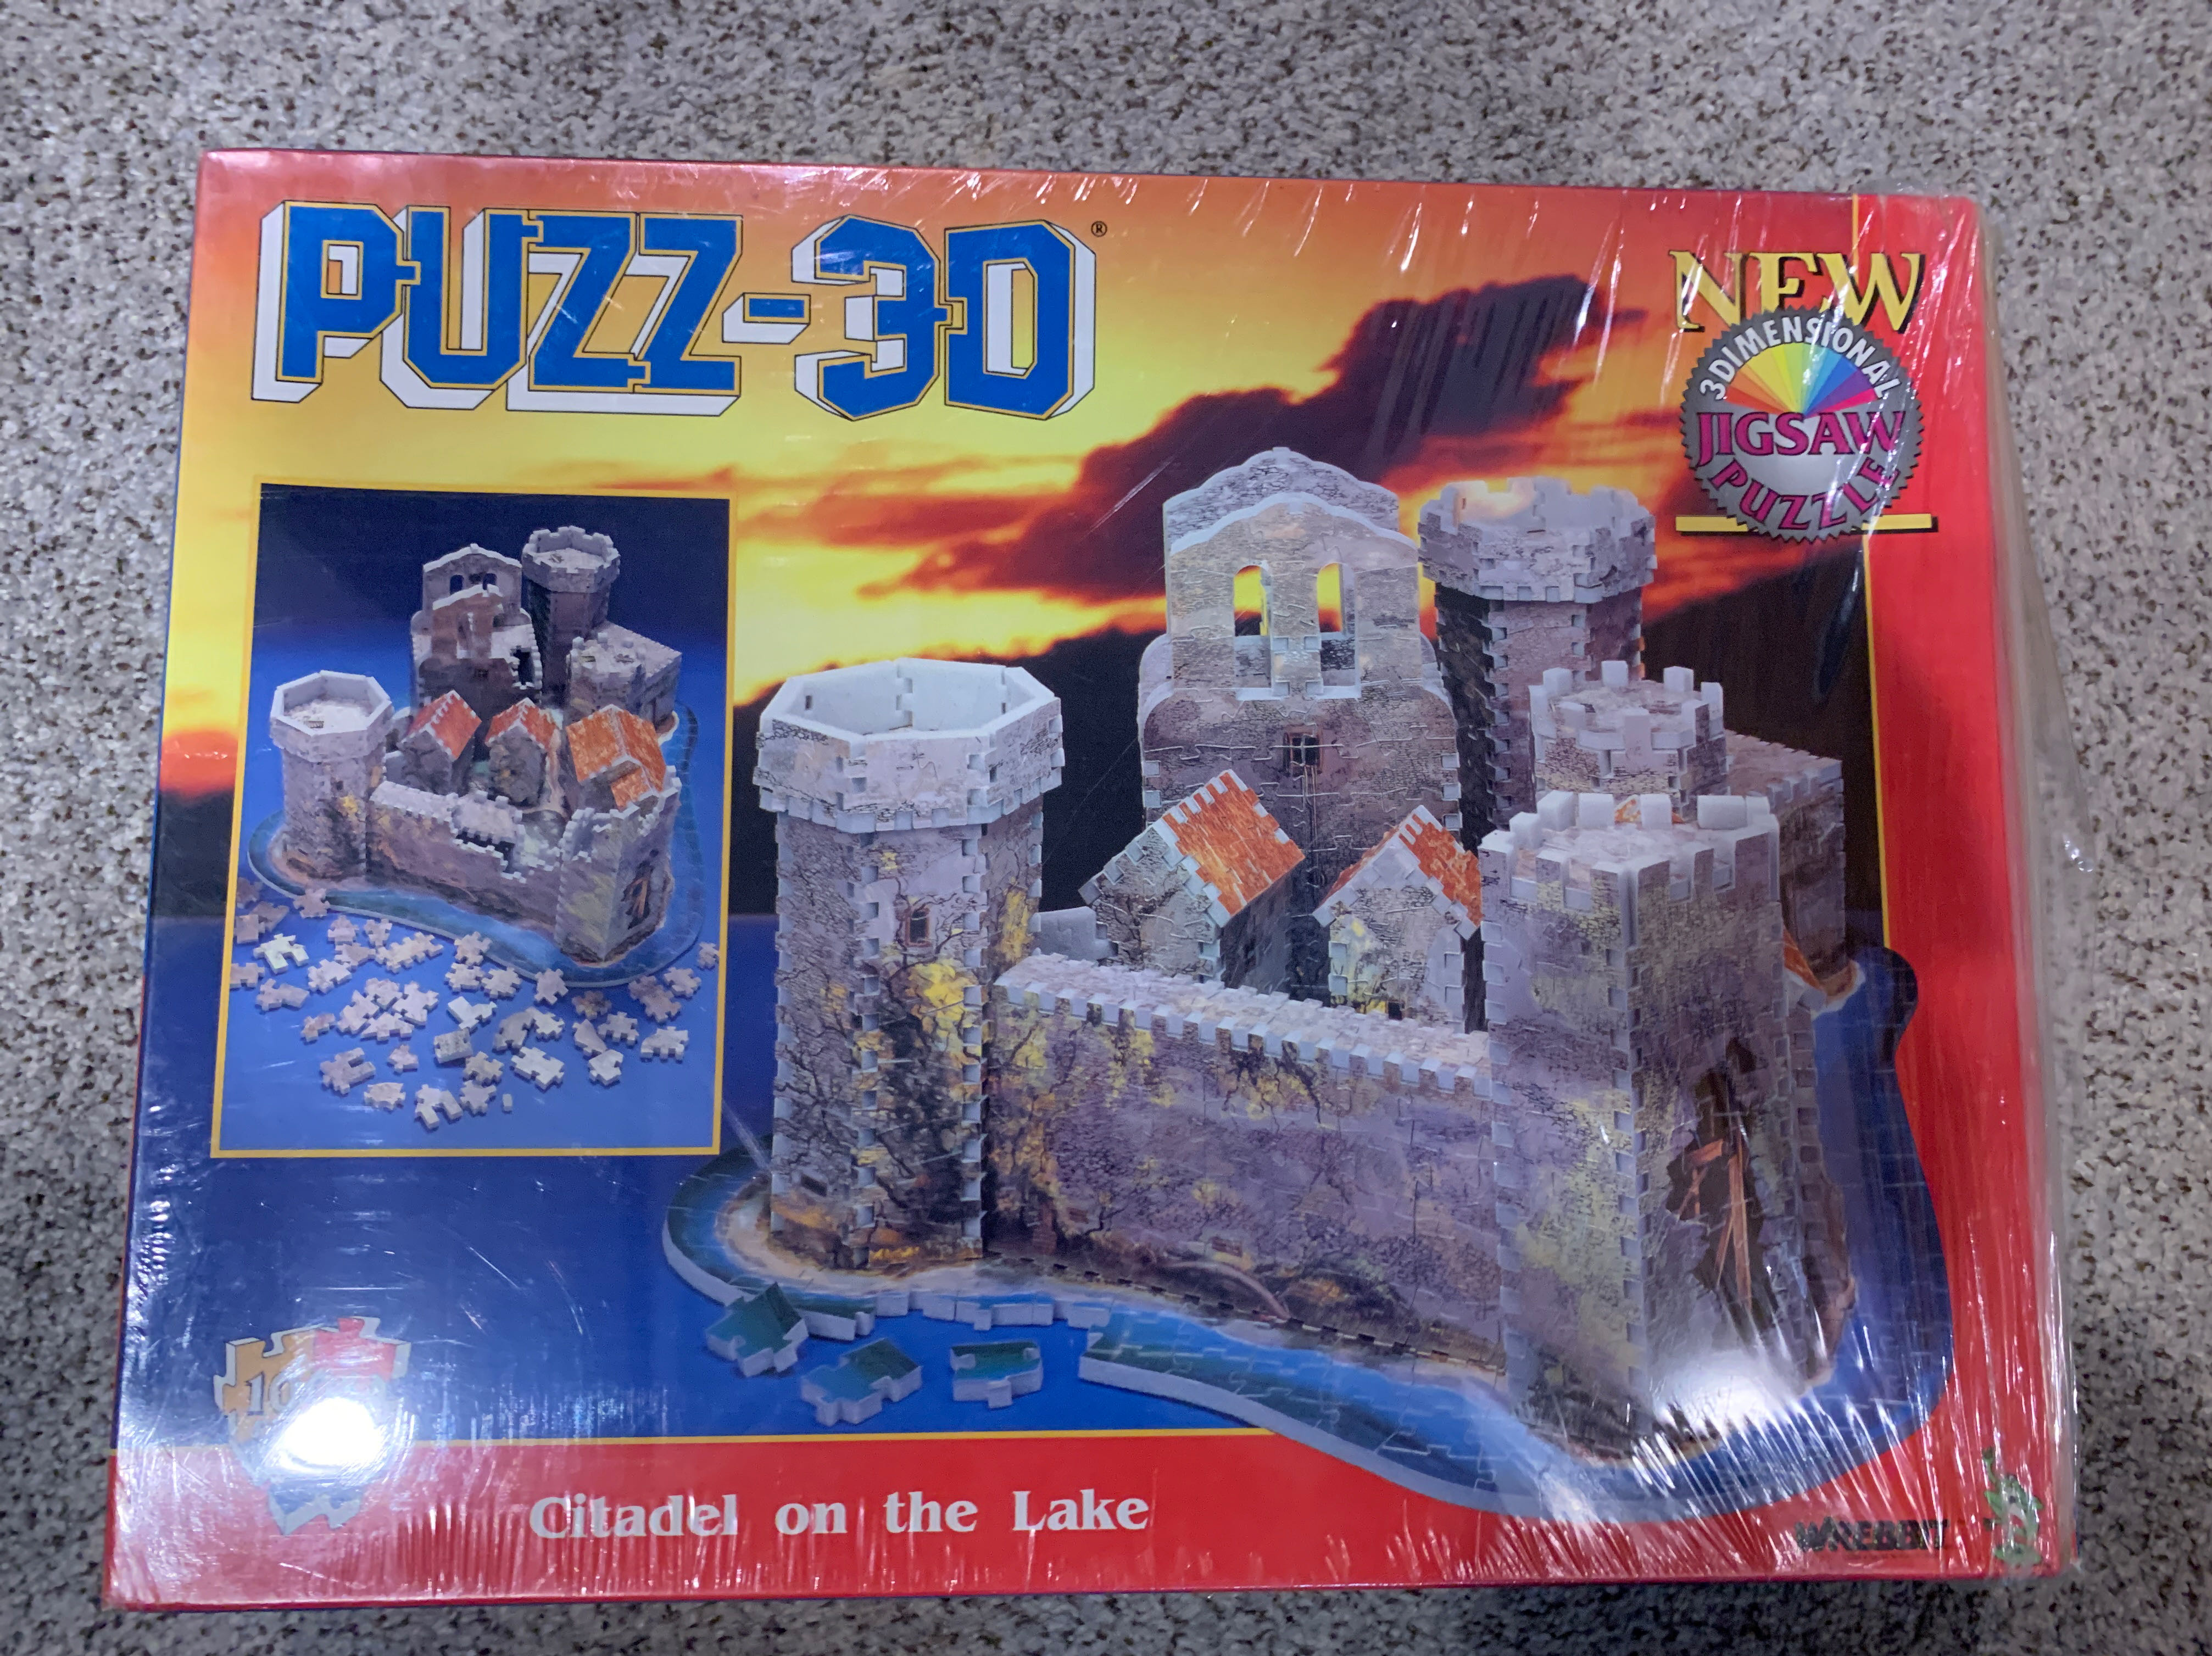 Citadel on the Lake - Wrebbit Puzz 3D puzzle collectible [Barcode 772666008040] - Main Image 1